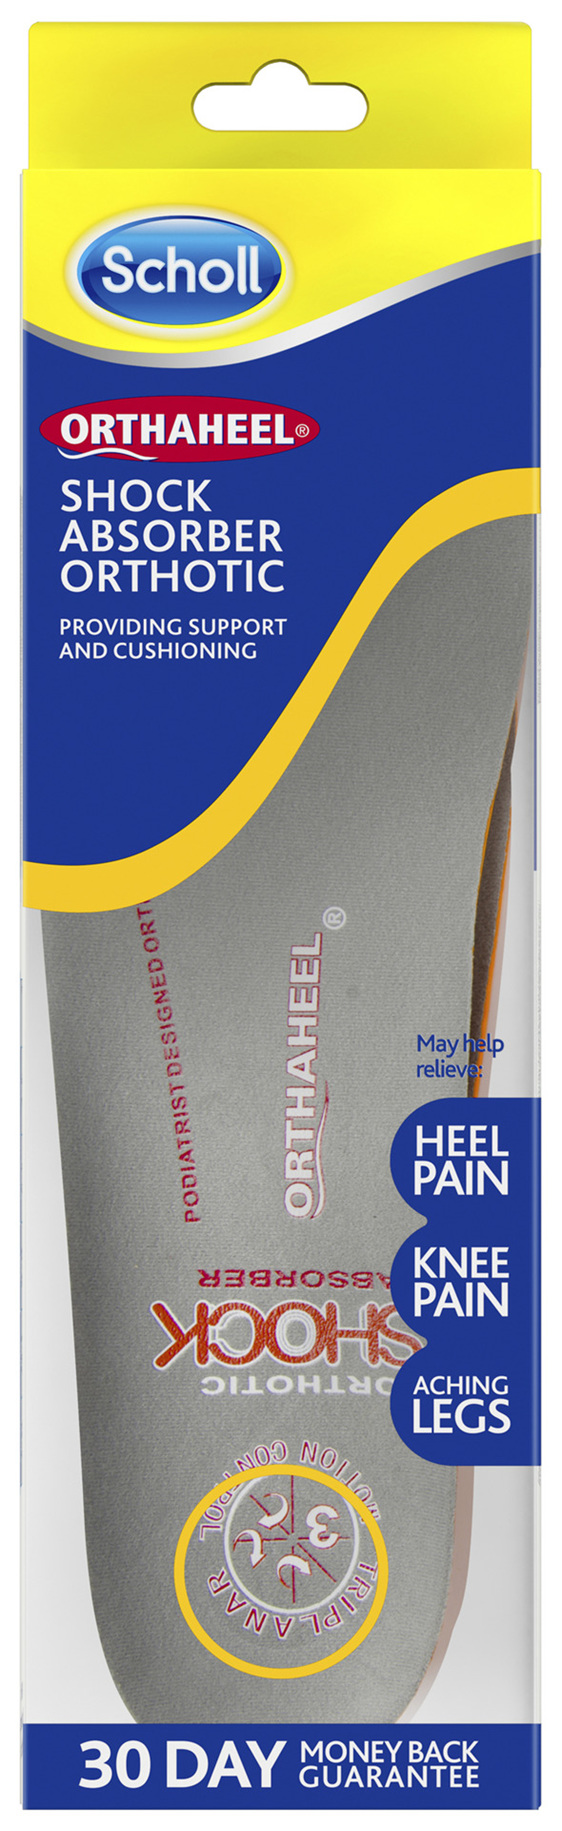 Scholl Orthaheel Shock Absorber Orthotic Small